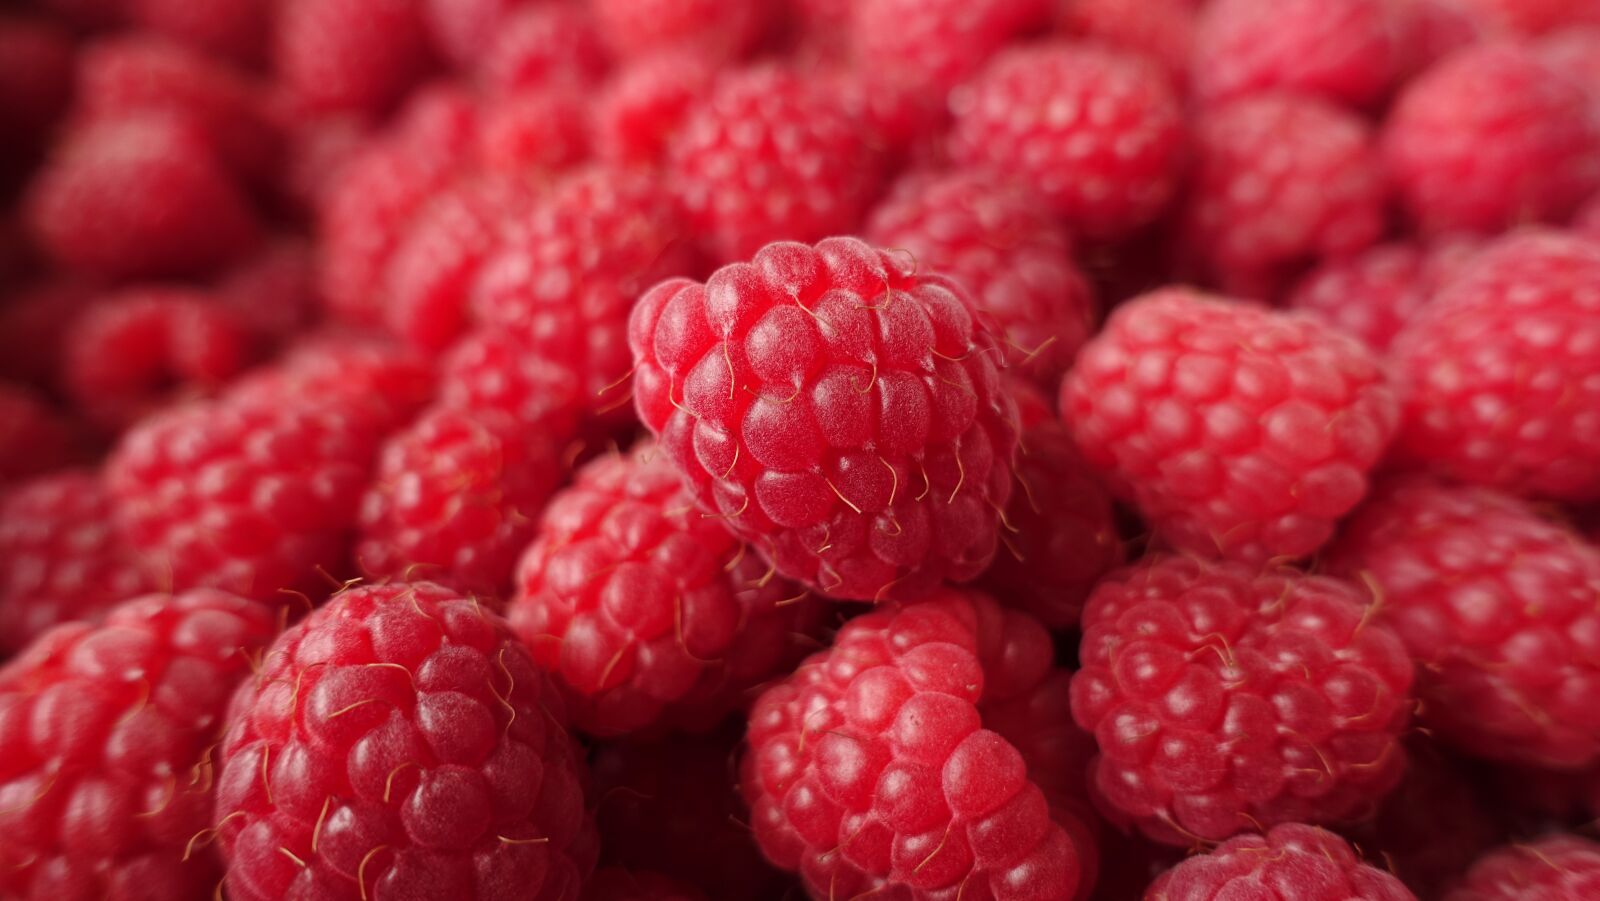 Sony DSC-RX100M5 sample photo. Raspberry, red, food photography